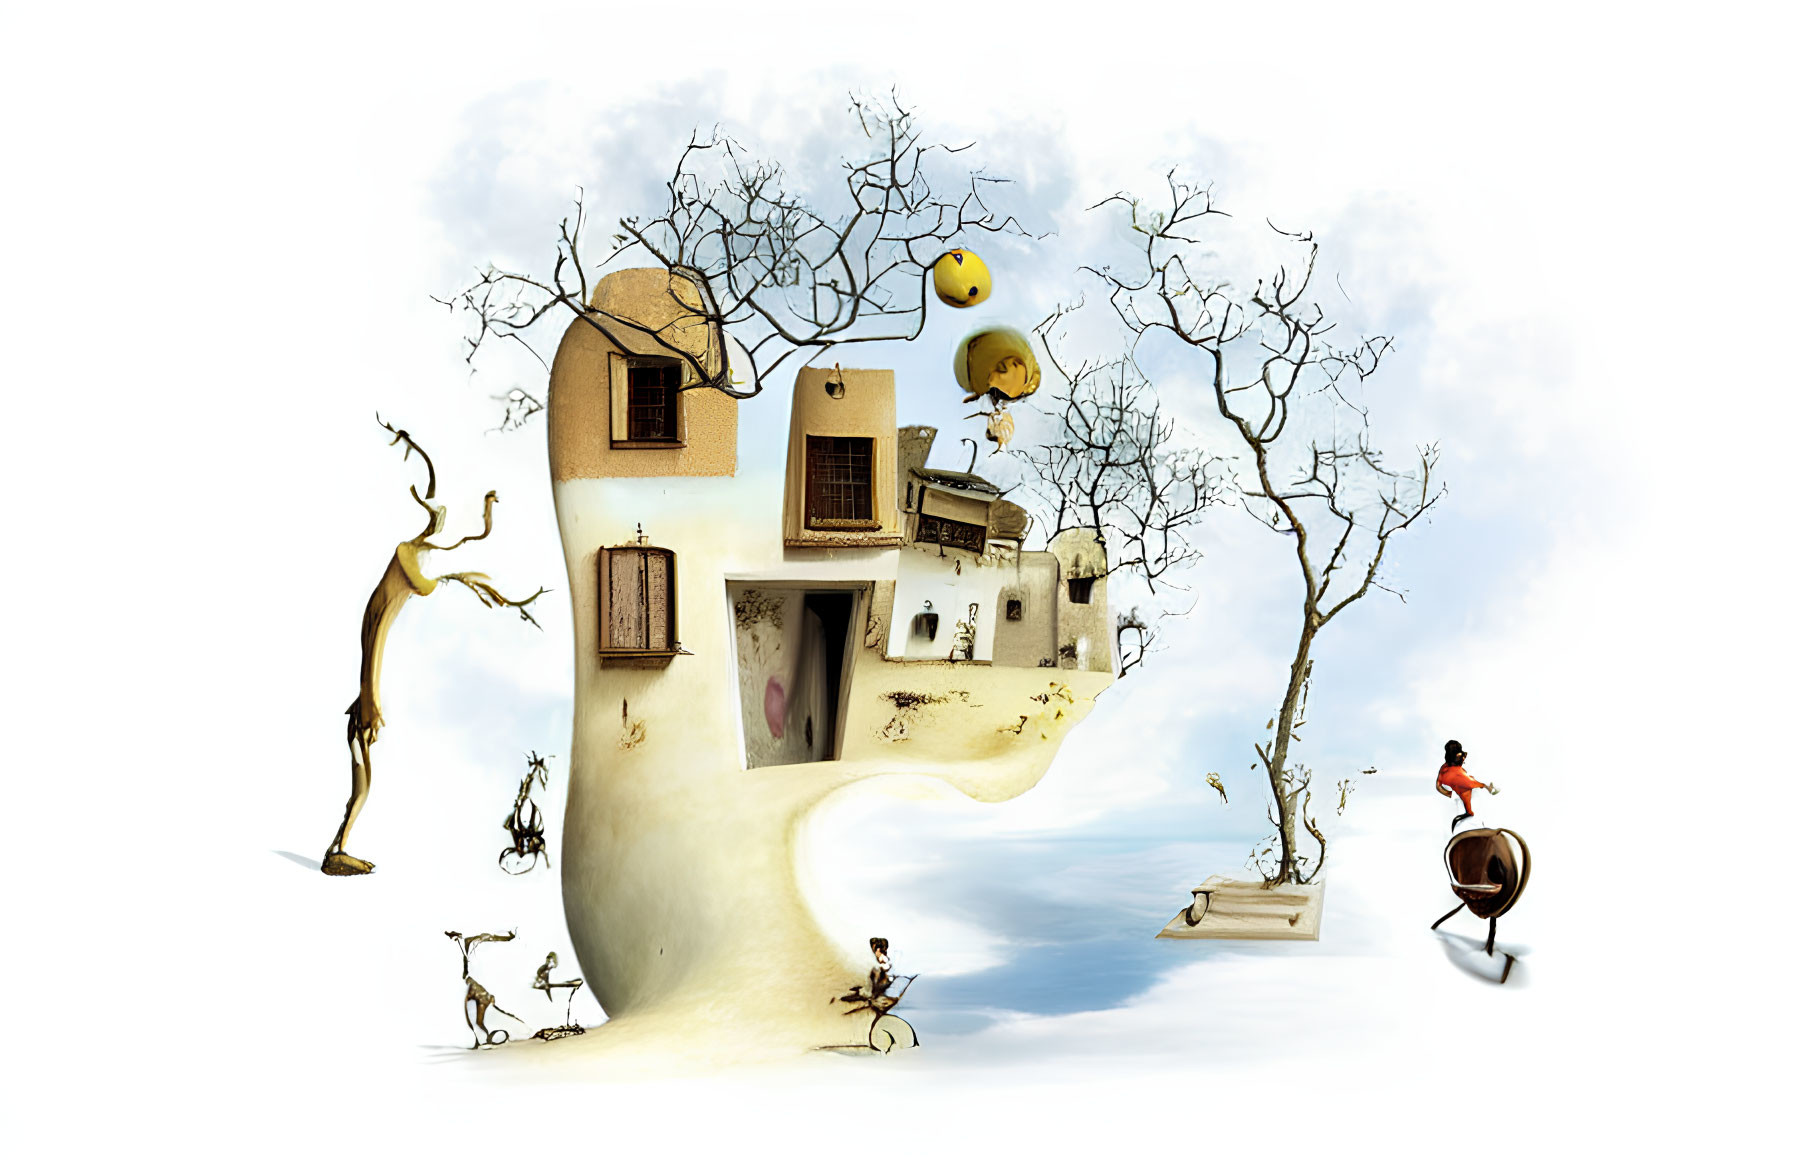 Surreal tree-like structure with houses as leaves and floating characters and objects.